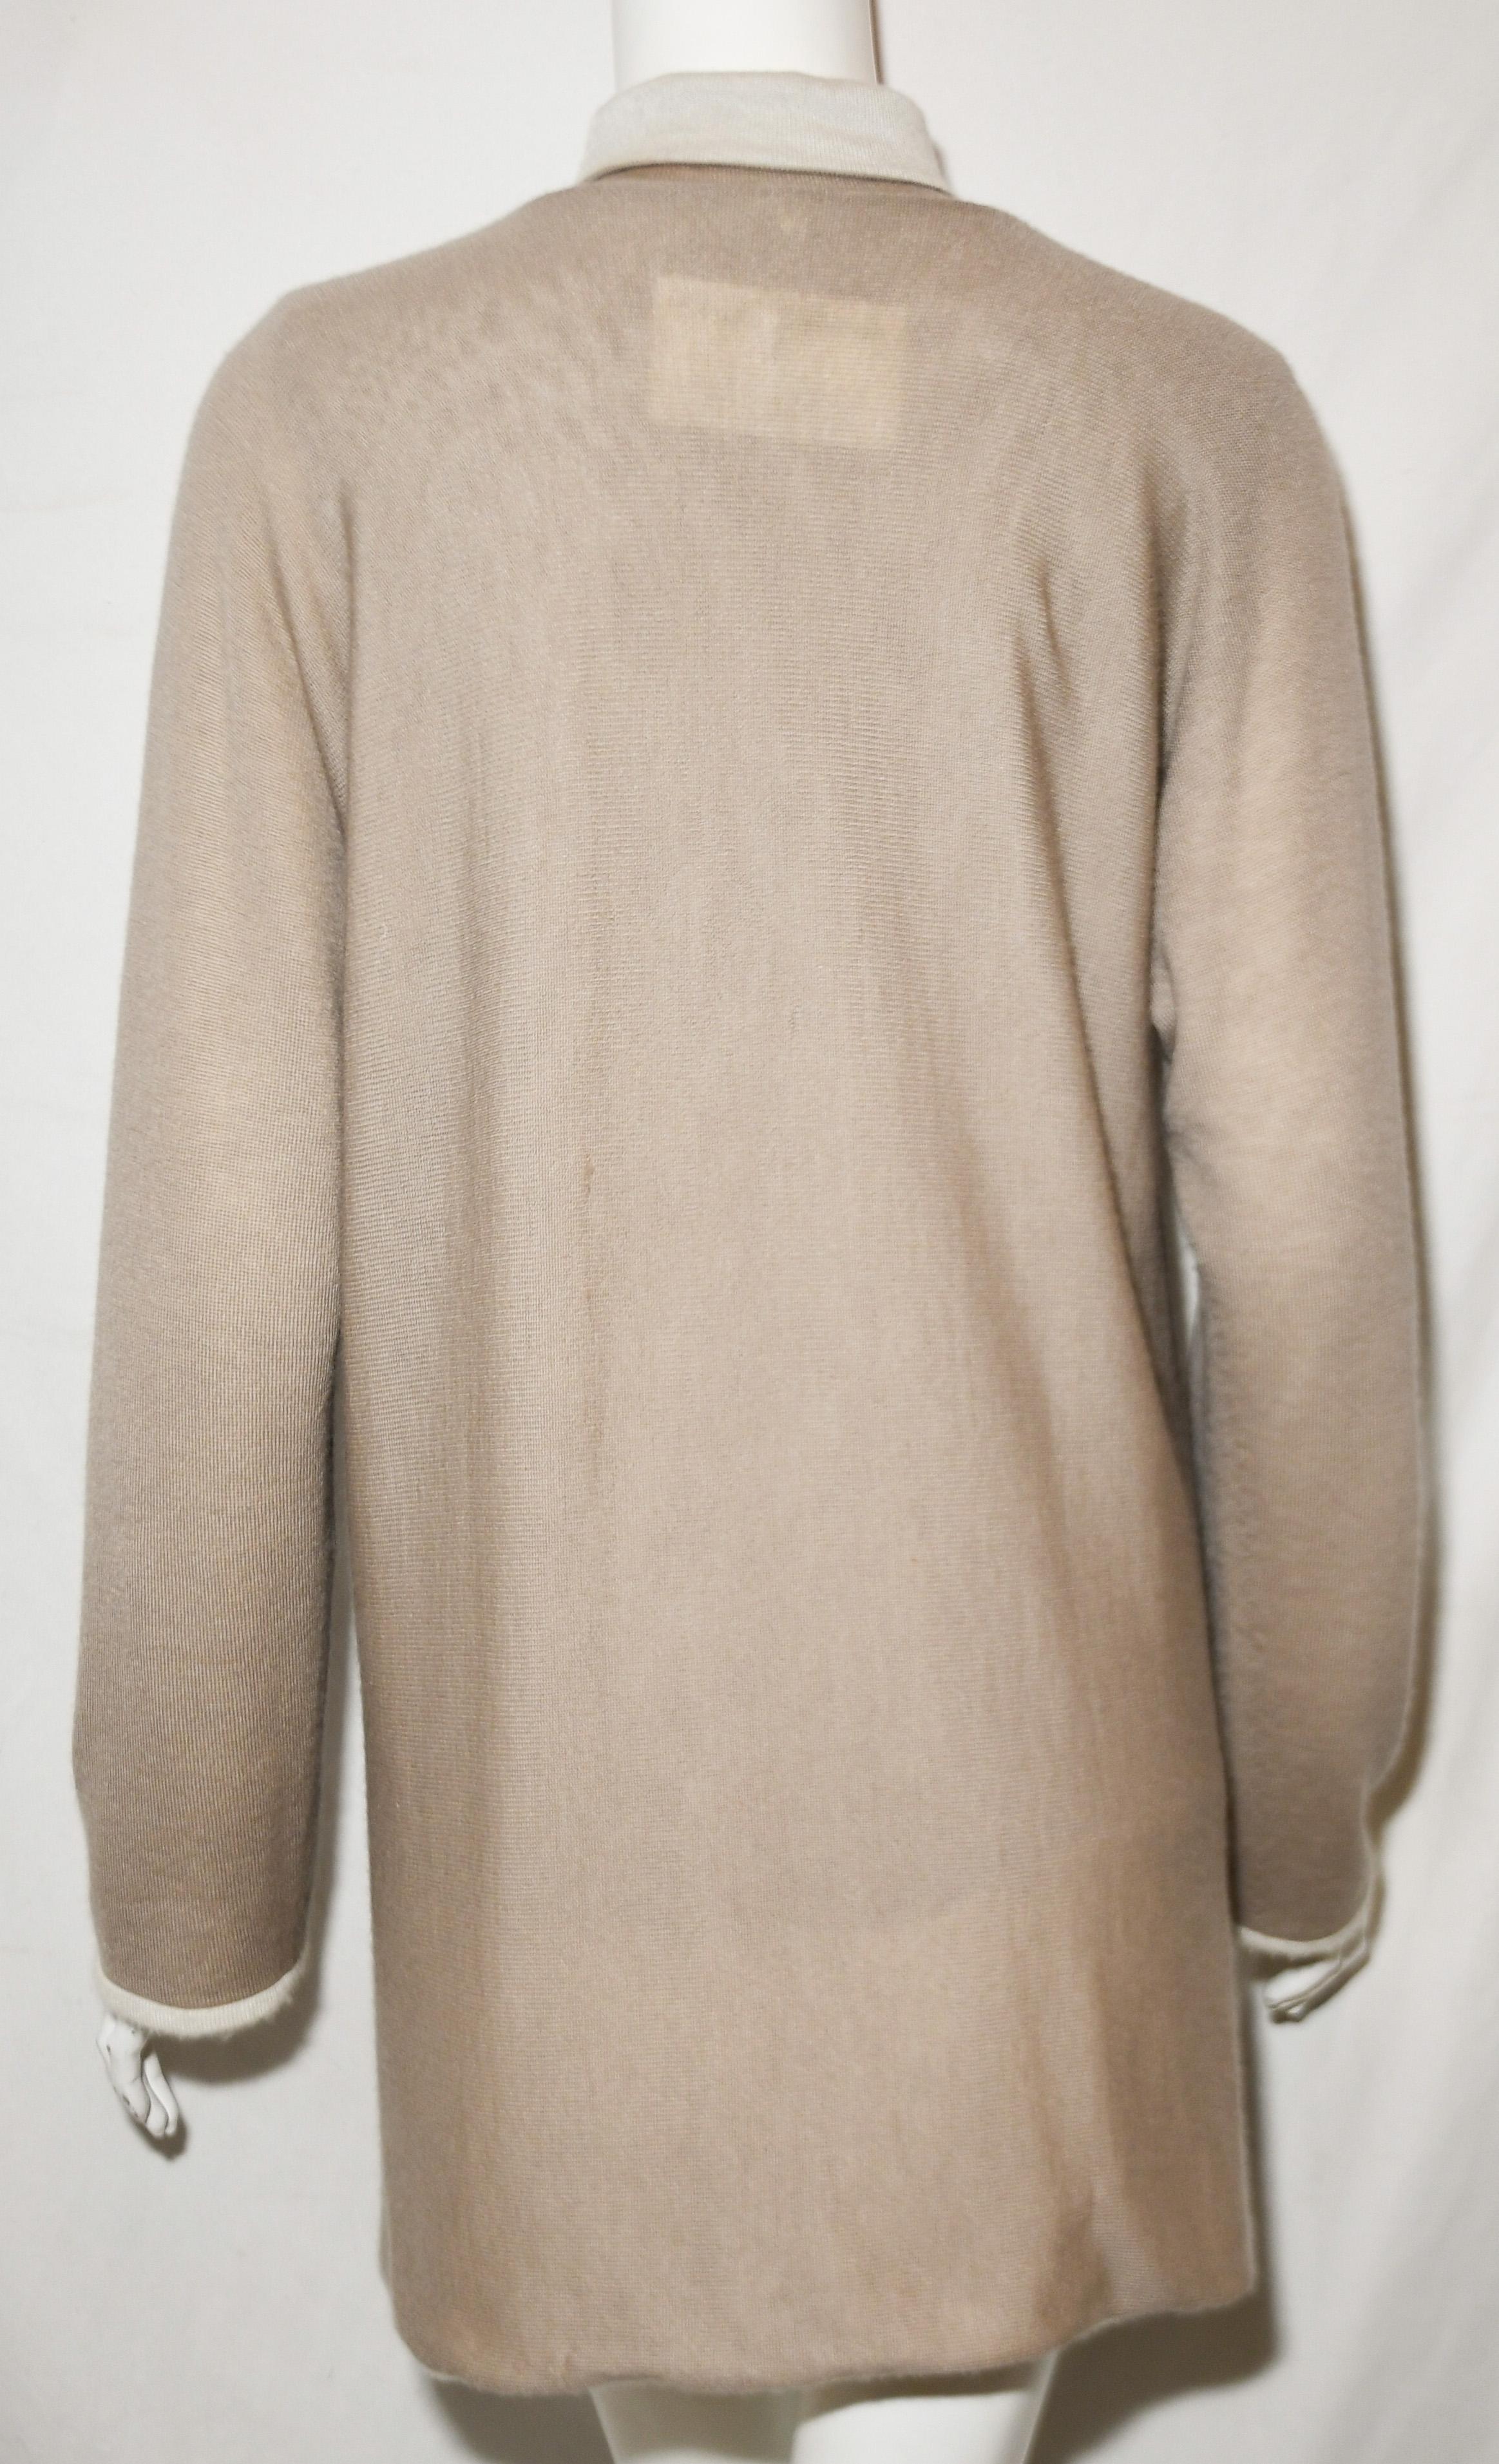 Women's Chanel Beige and Ivory Cashmere Sweater Set 